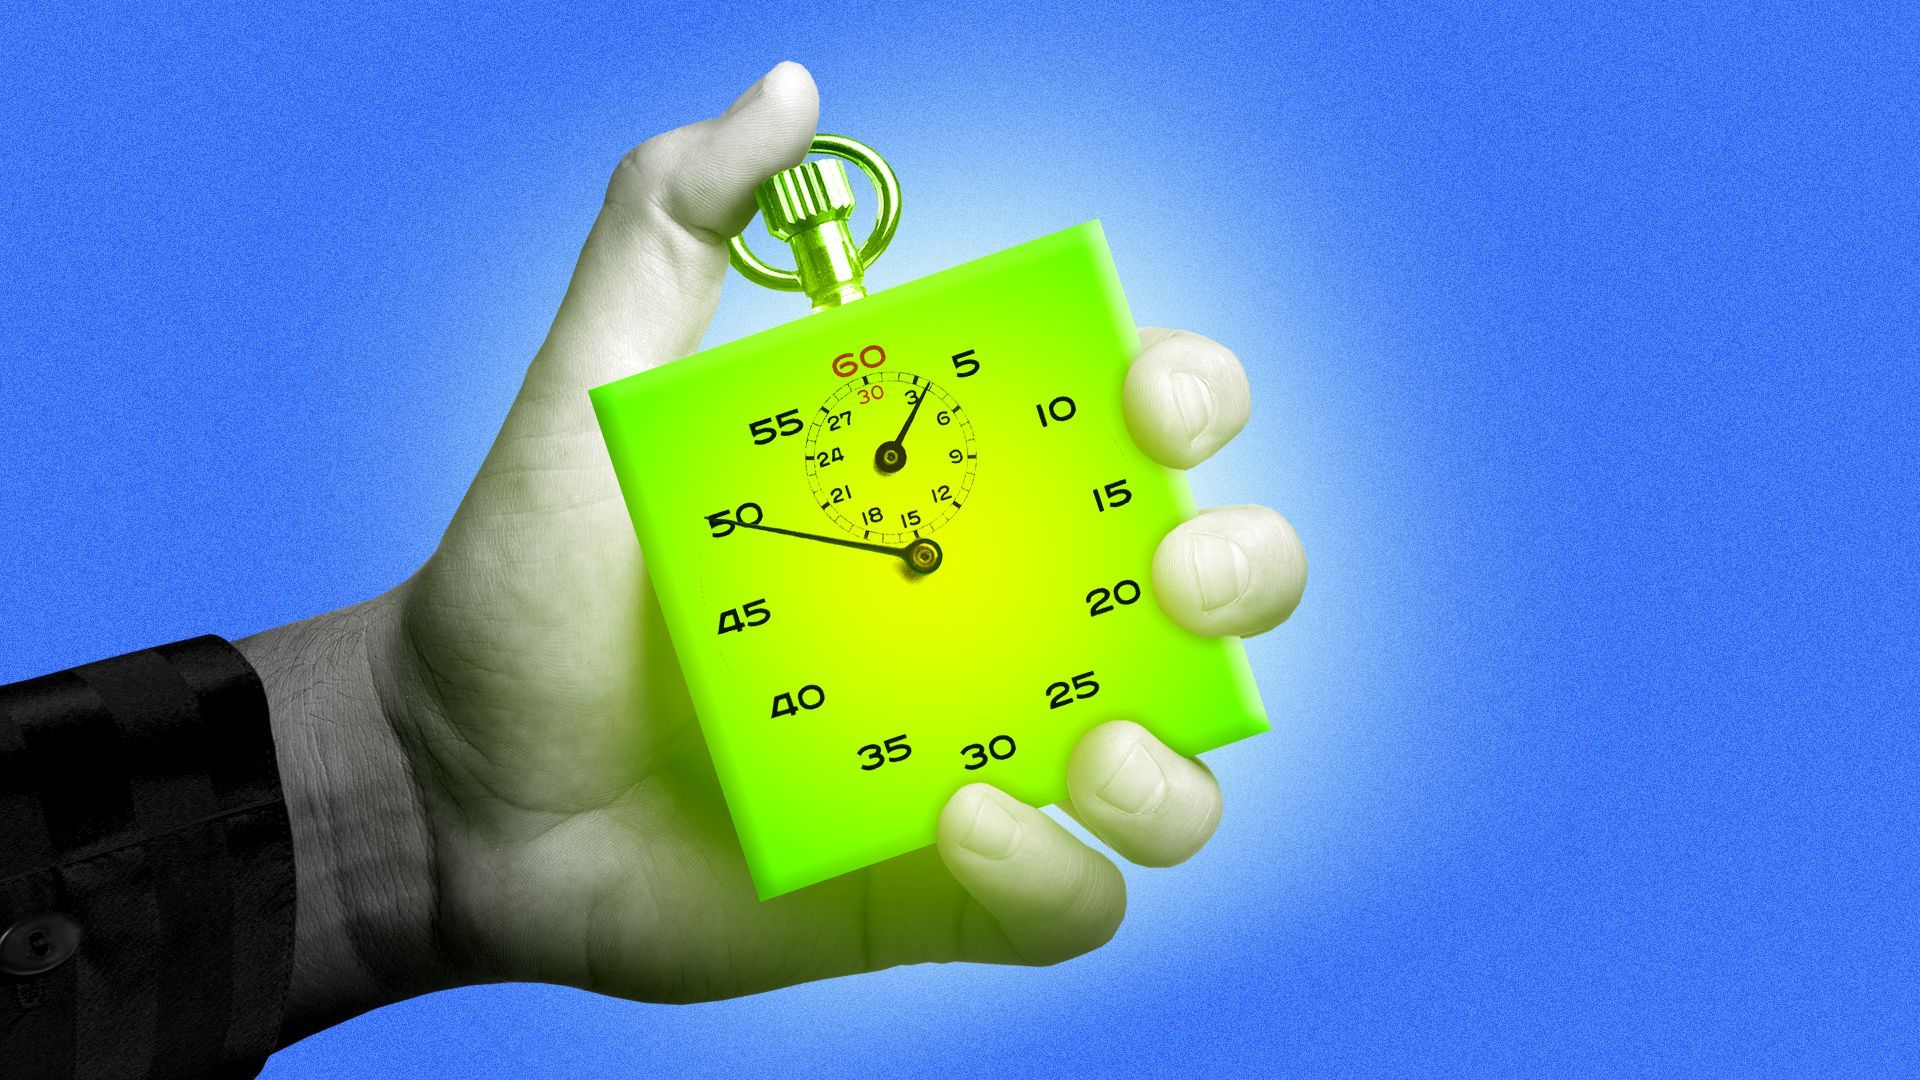 Illustration of a hand holding a glowing green cube-shaped stopwatch